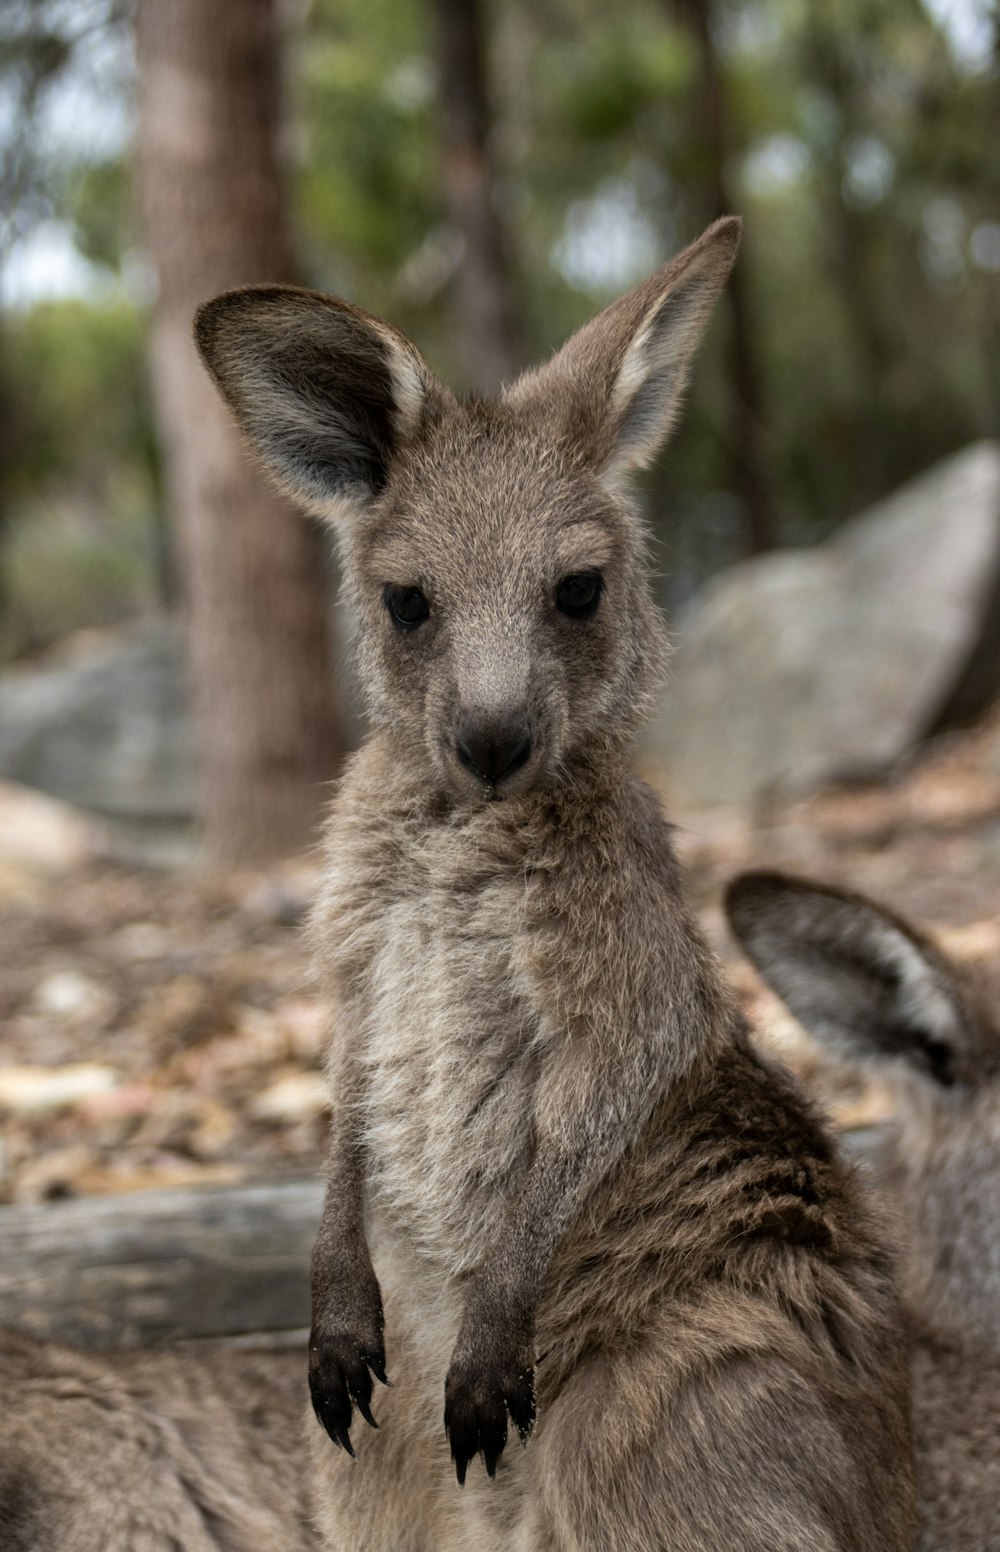 a baby kangaroo standing on its hind legs